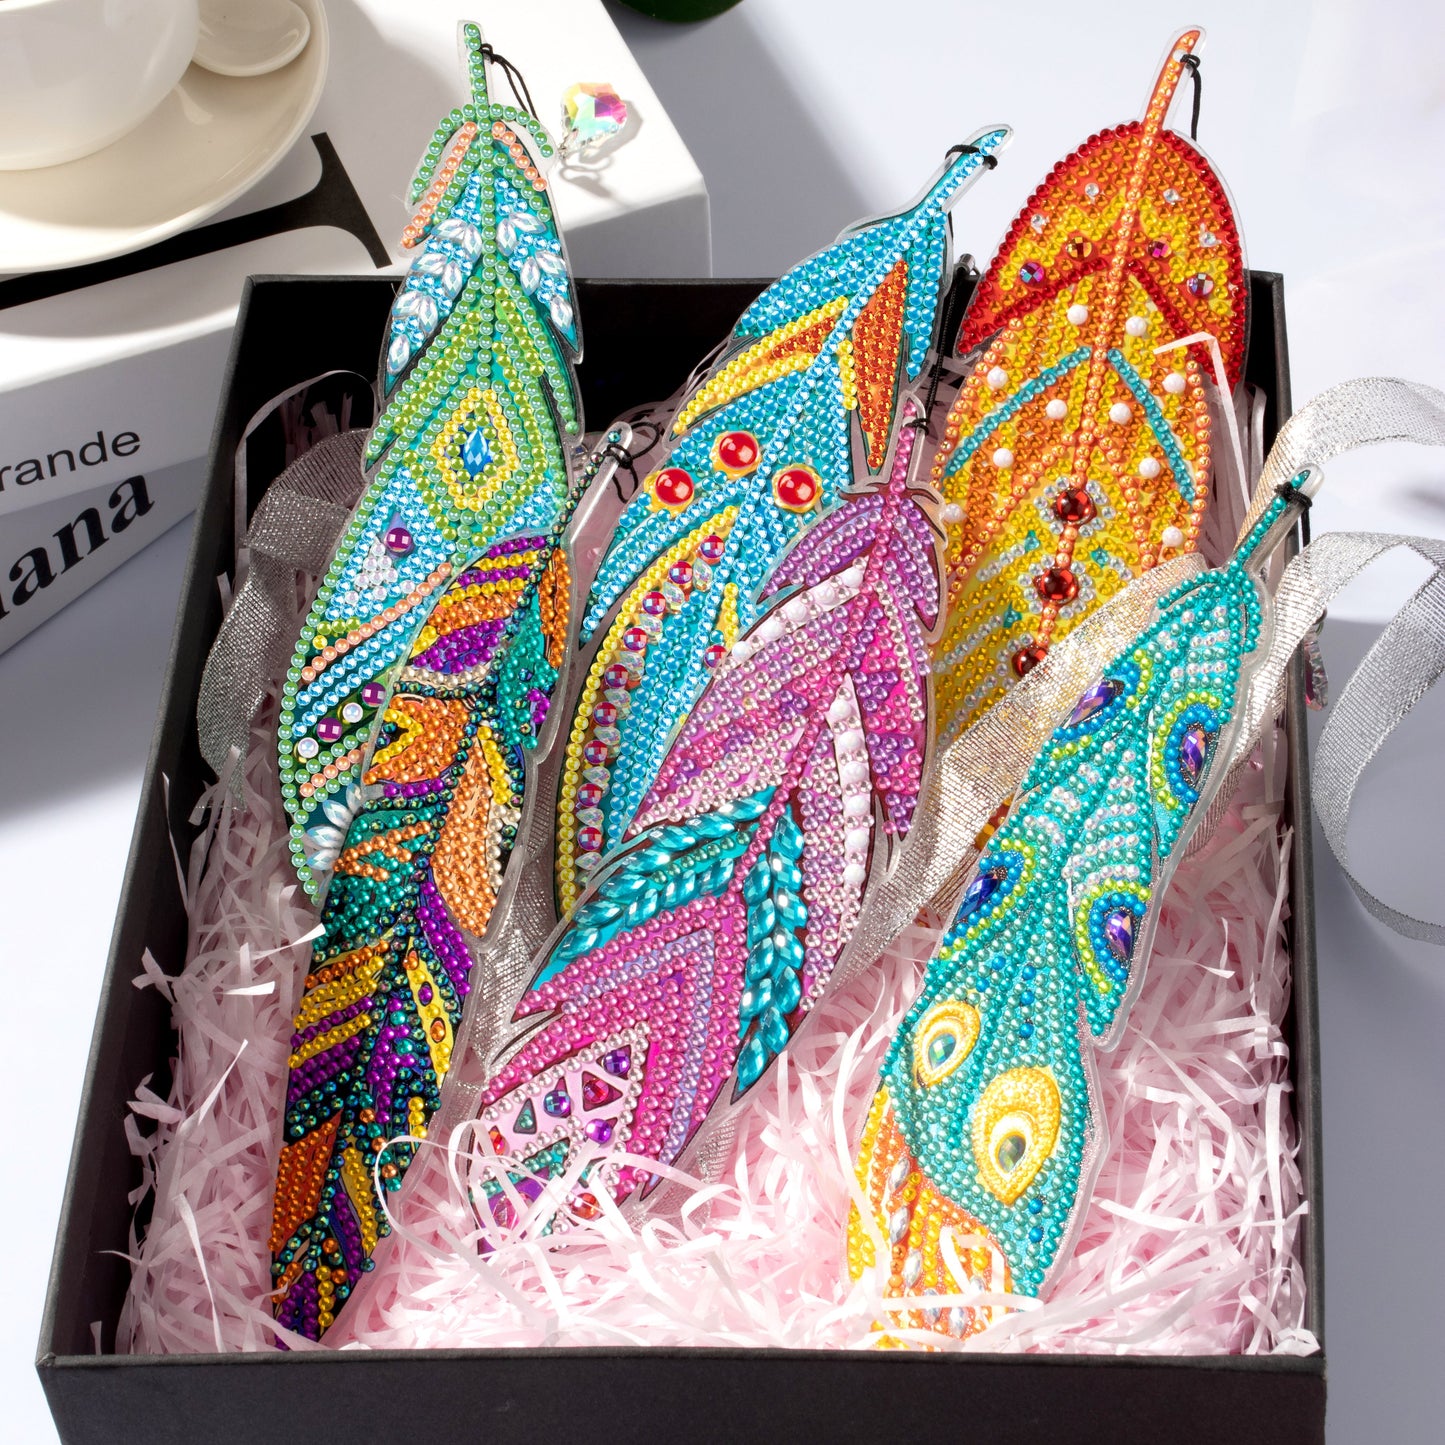 6 Pcs Set DIY Special Shaped Diamond Painting Bookmark | Feather